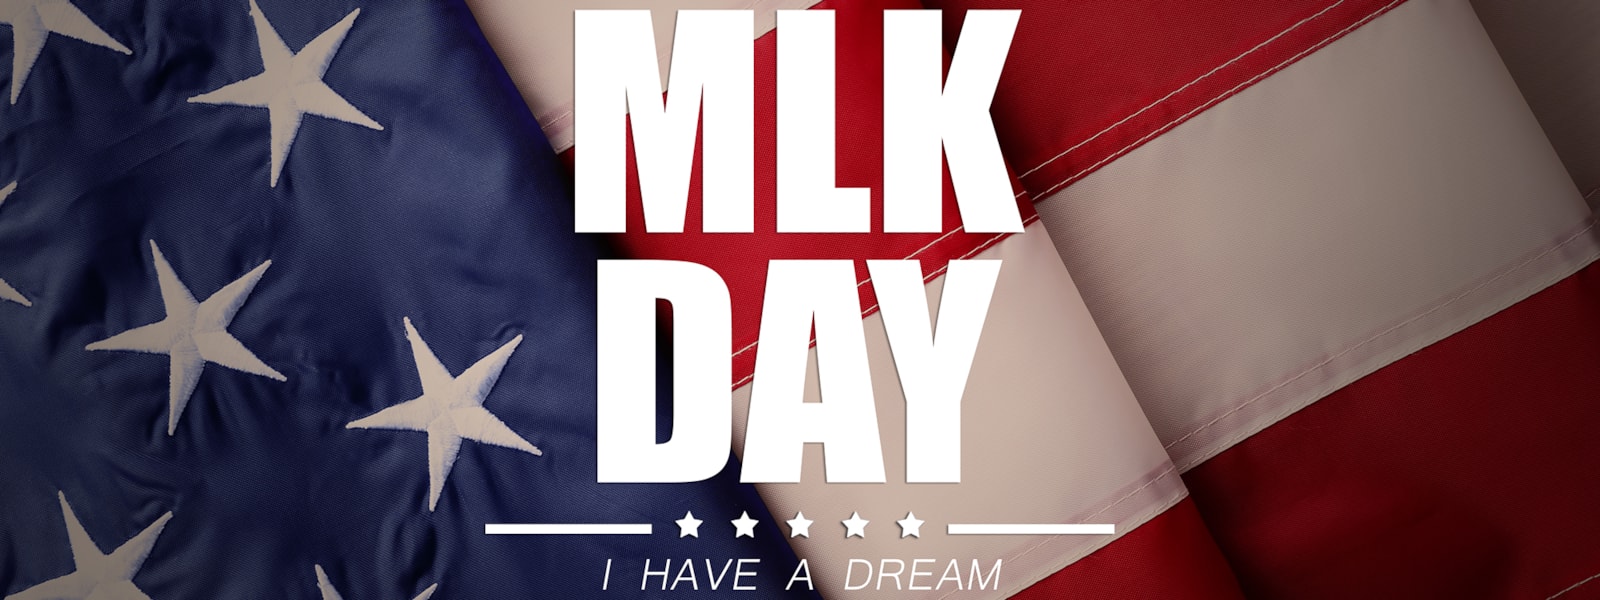 Martin Luther King Jr Day, I have a dream and American flag